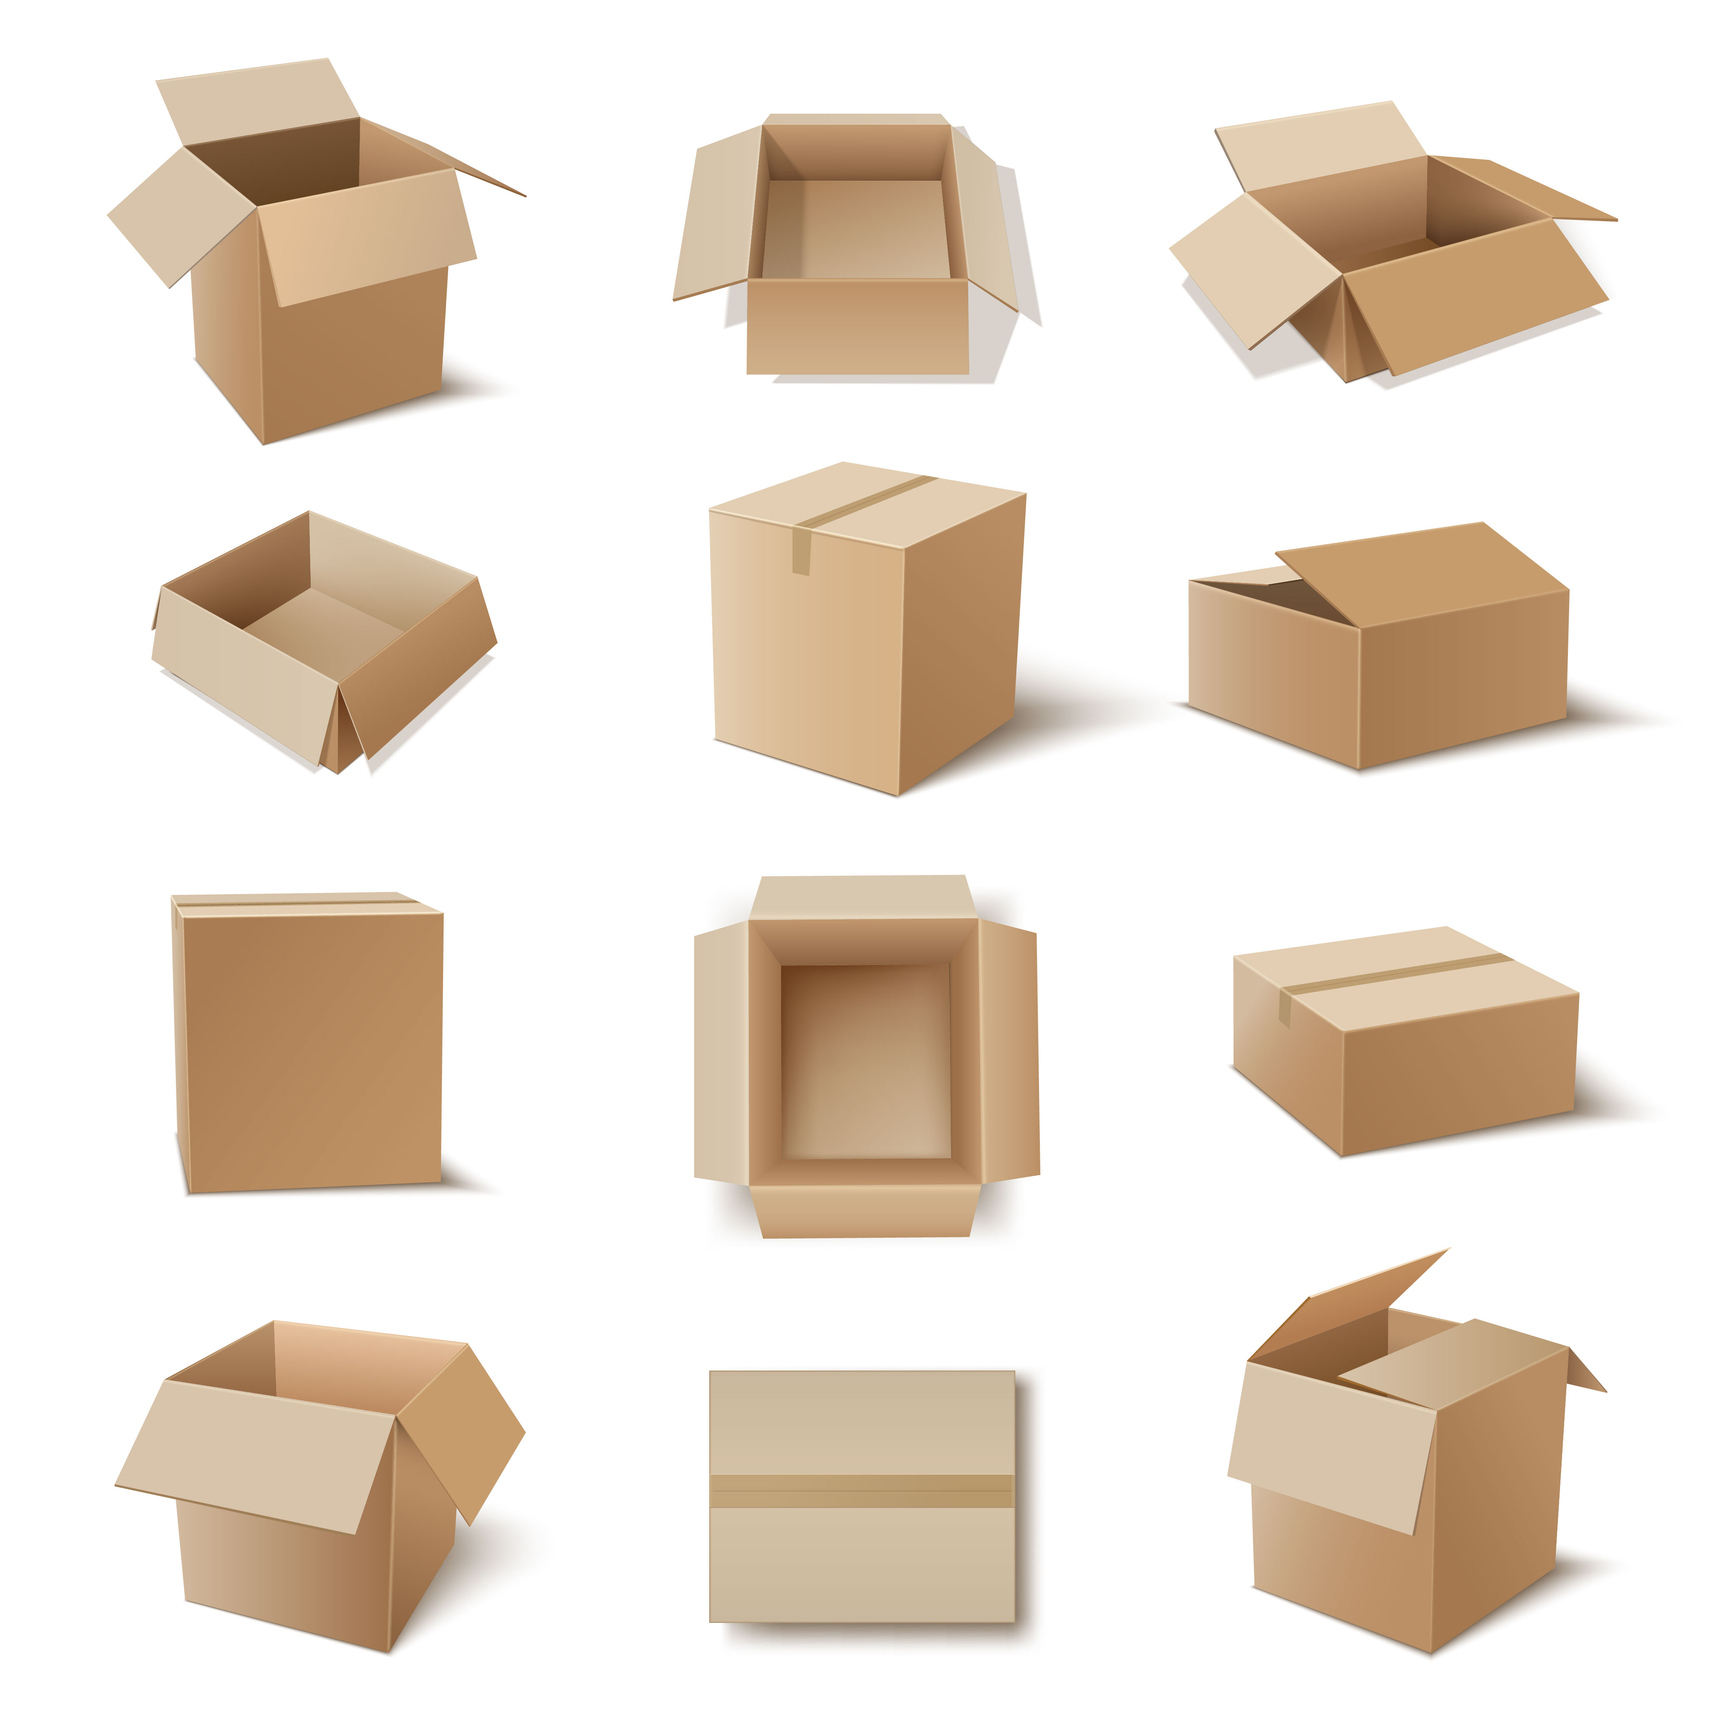 Corrugated boxes in various stages of being opened and closed